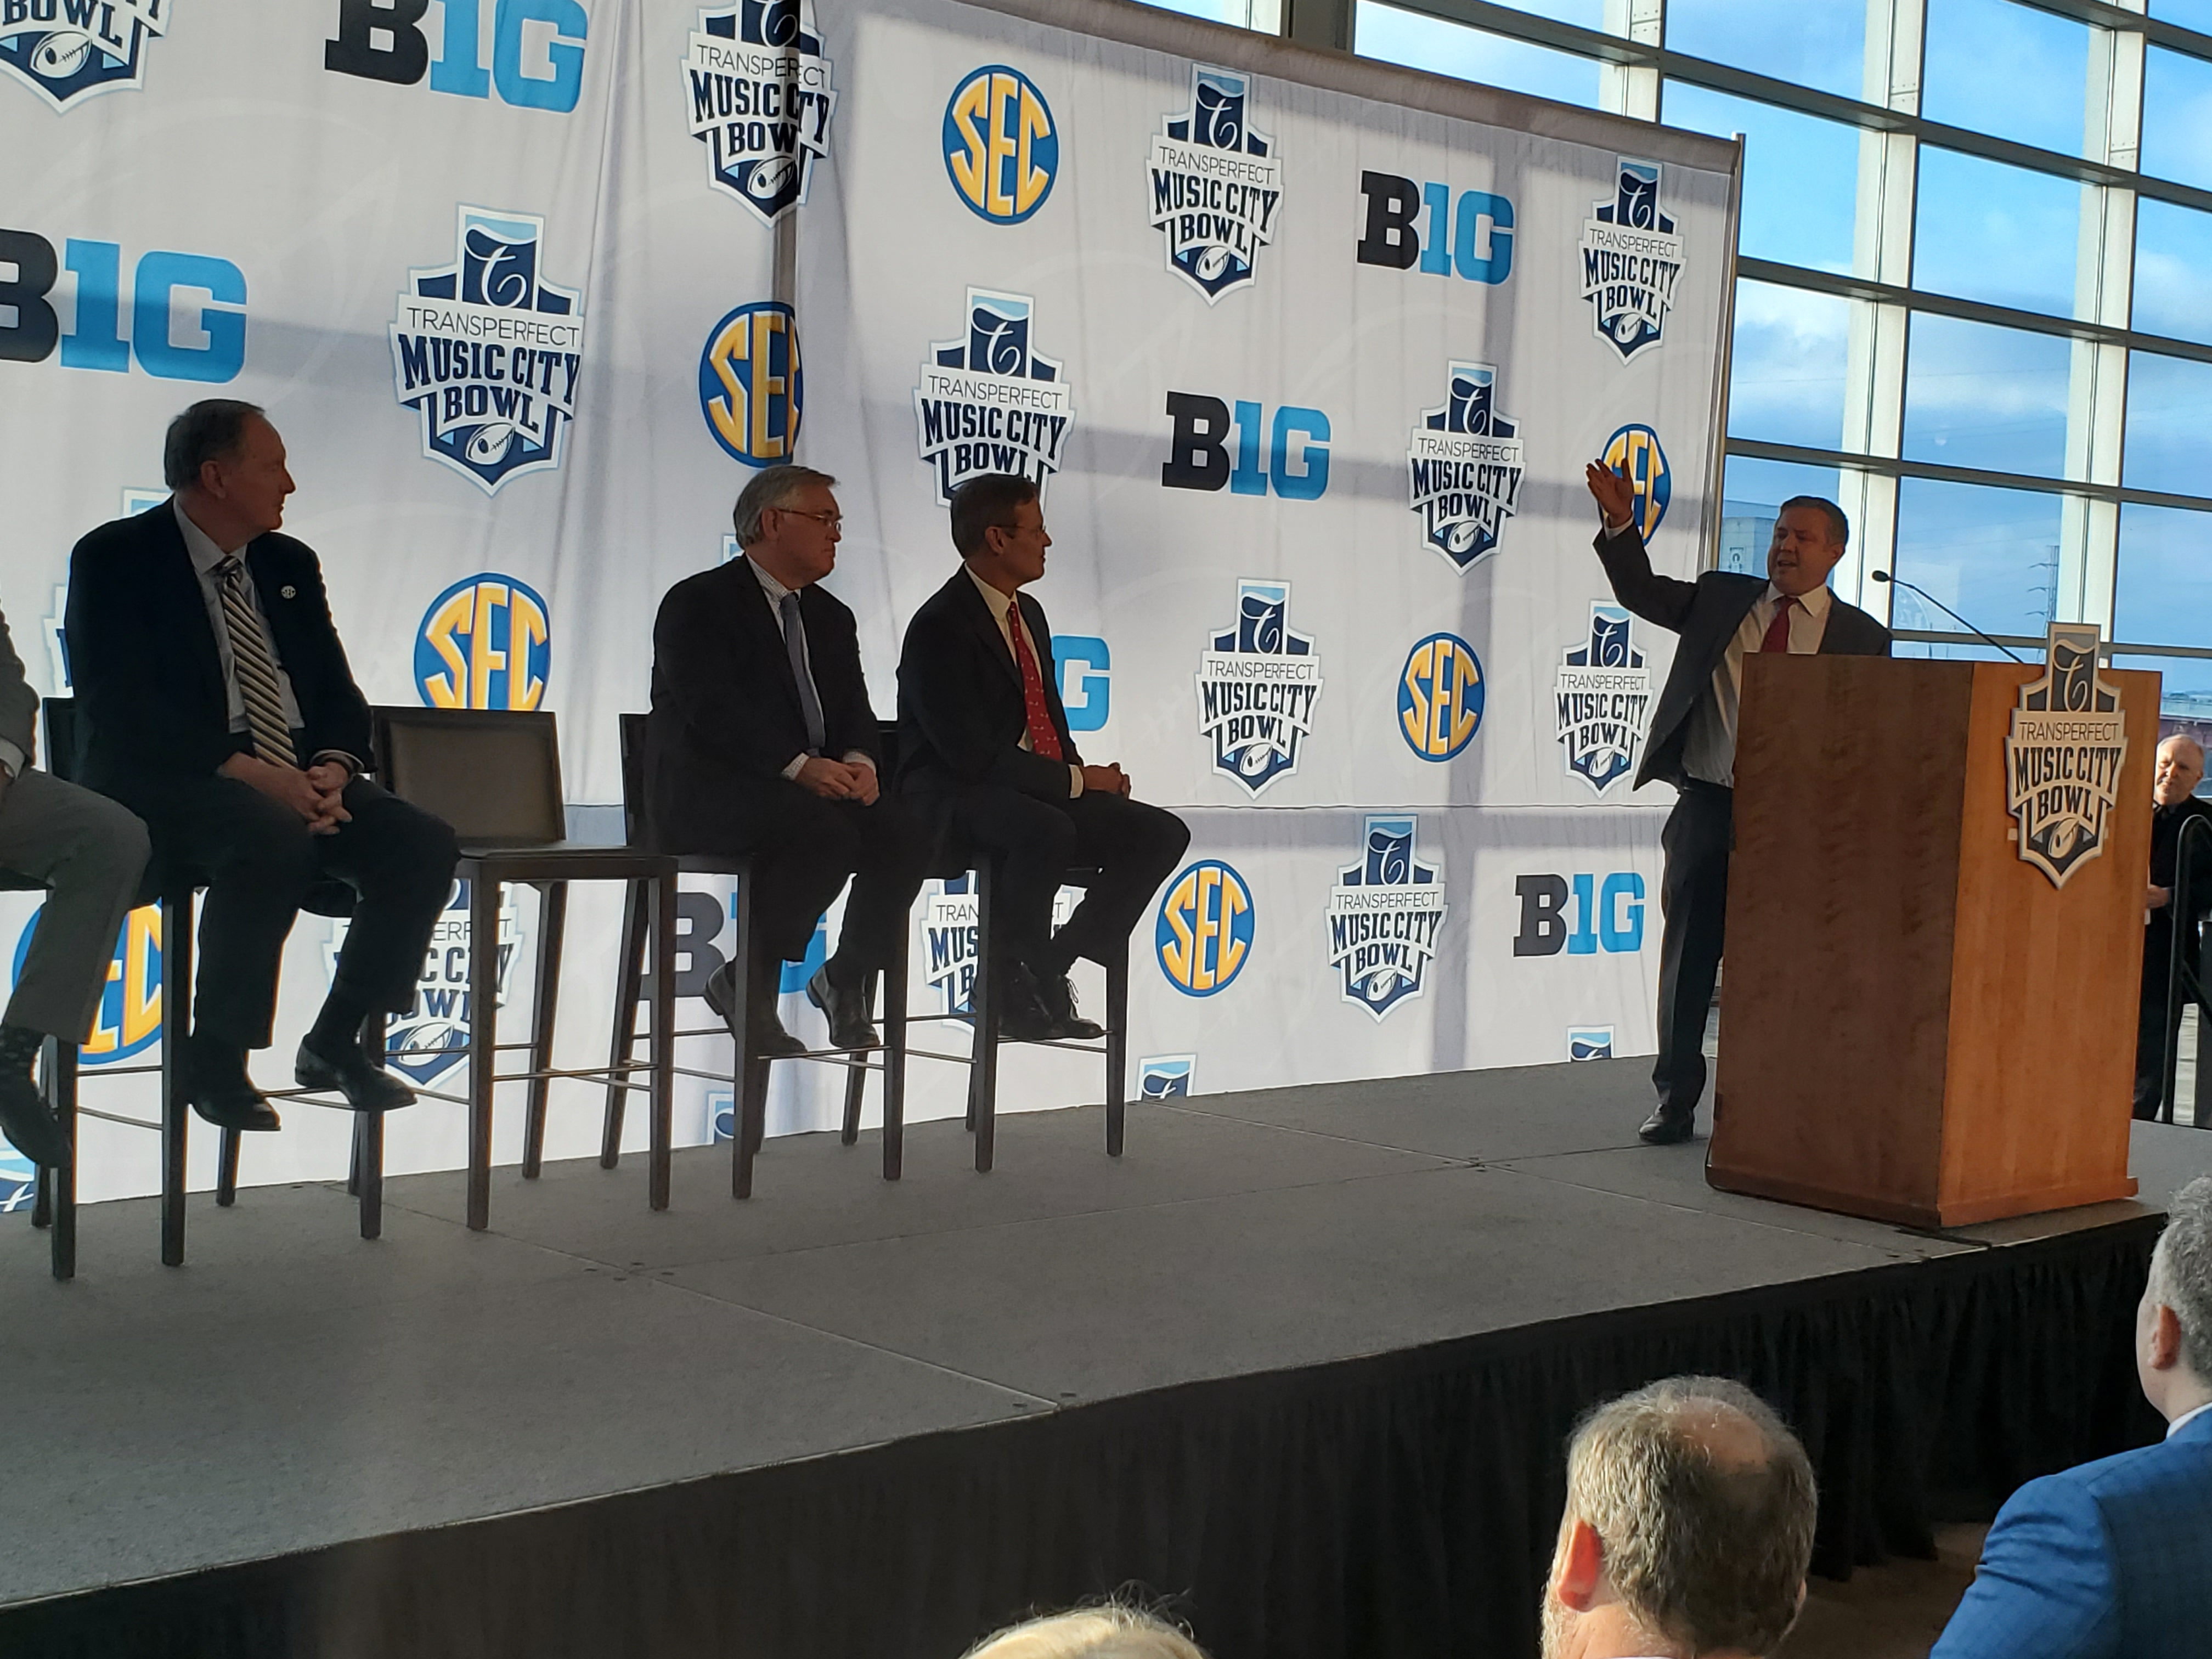 Shawe announcing TransPerfect’s 5 year sponsorship of Tennessee’s Music City Bowl game played every year December 30. Photo provided by Shawe.